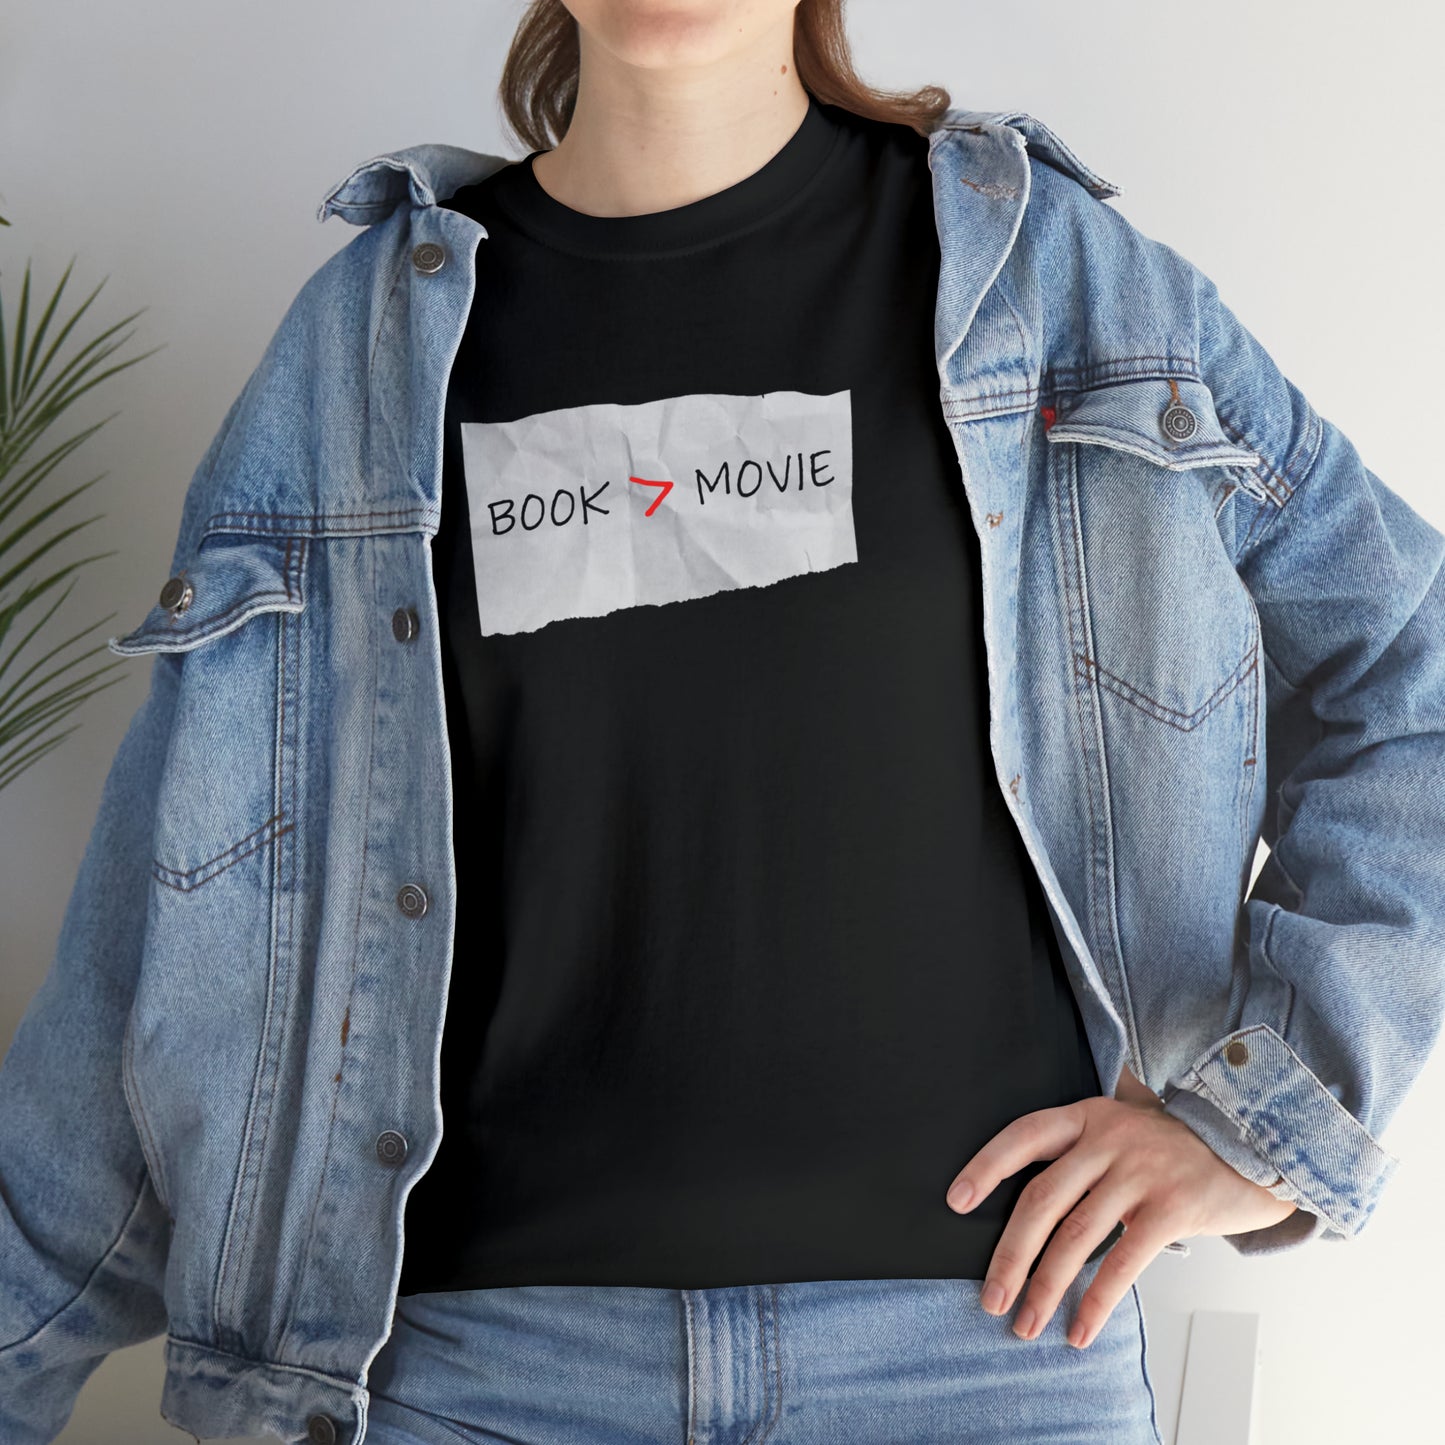 Book Greater Than Movie - Cotton Tee